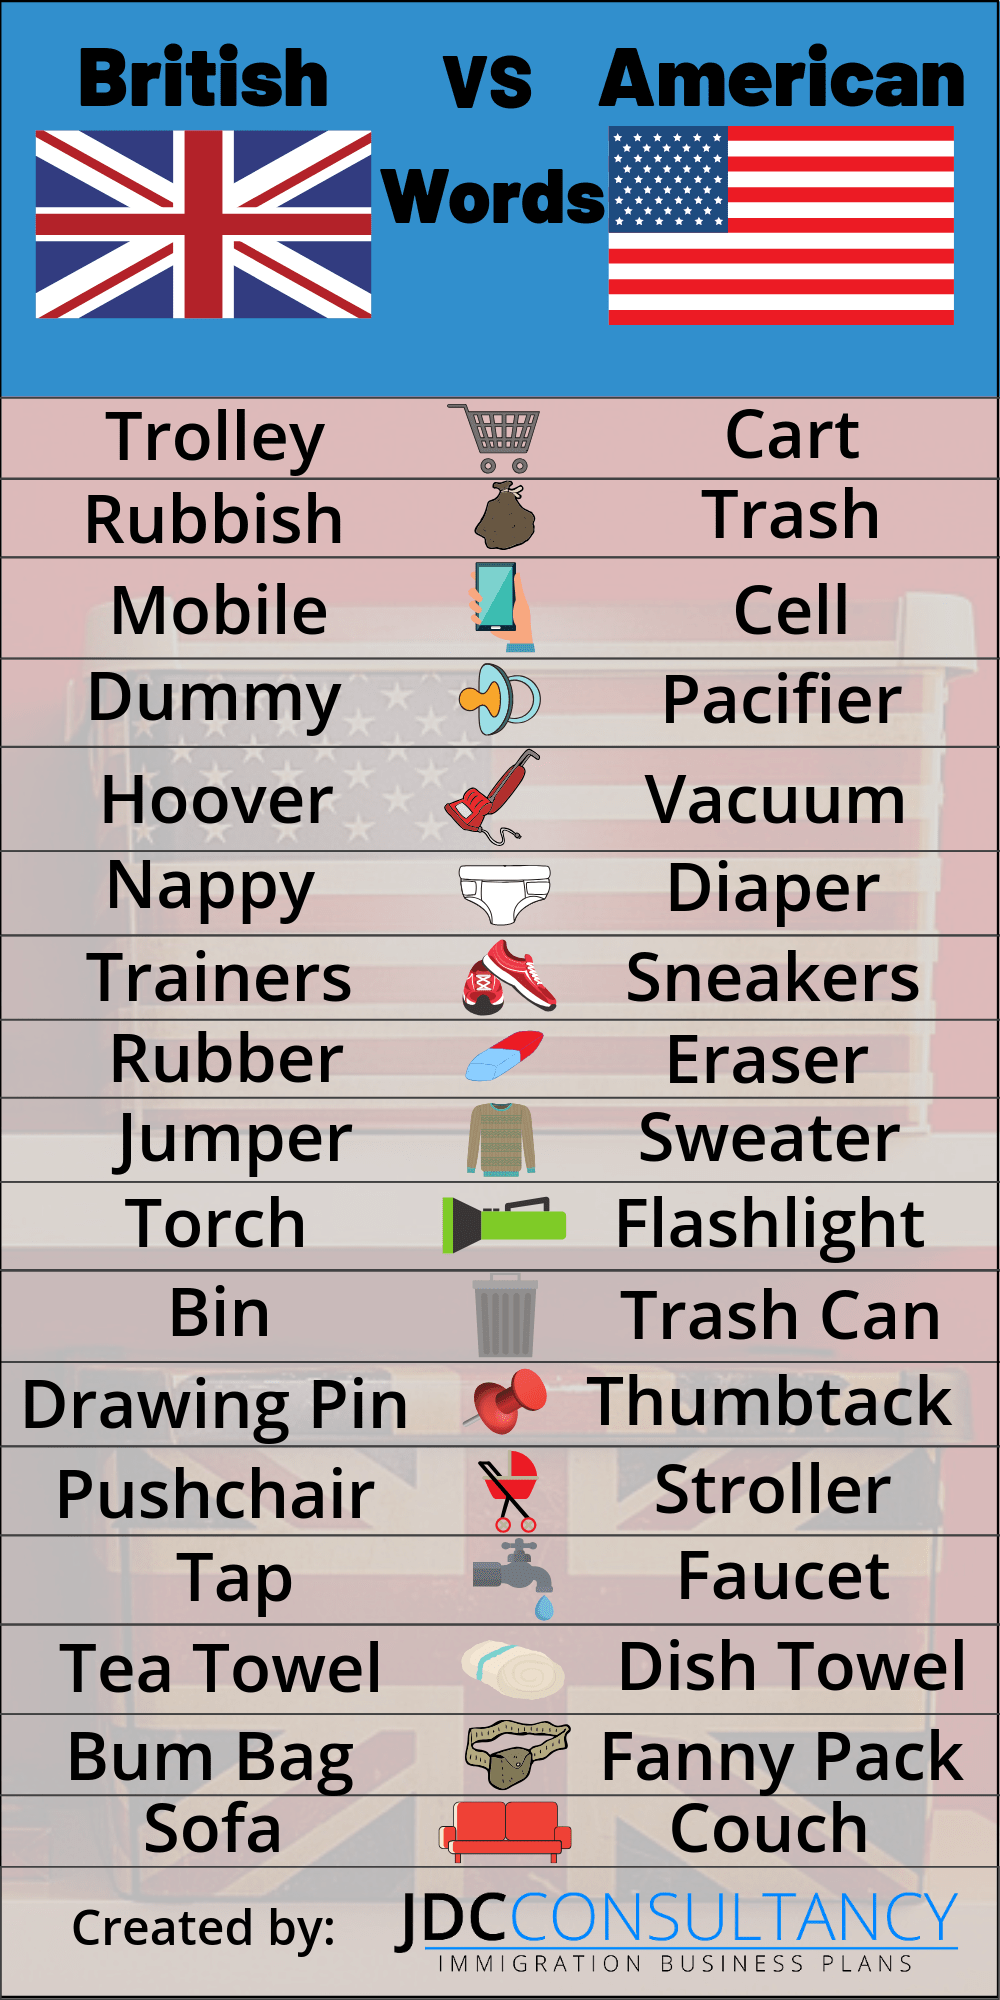 British words vs American words Items and Objects